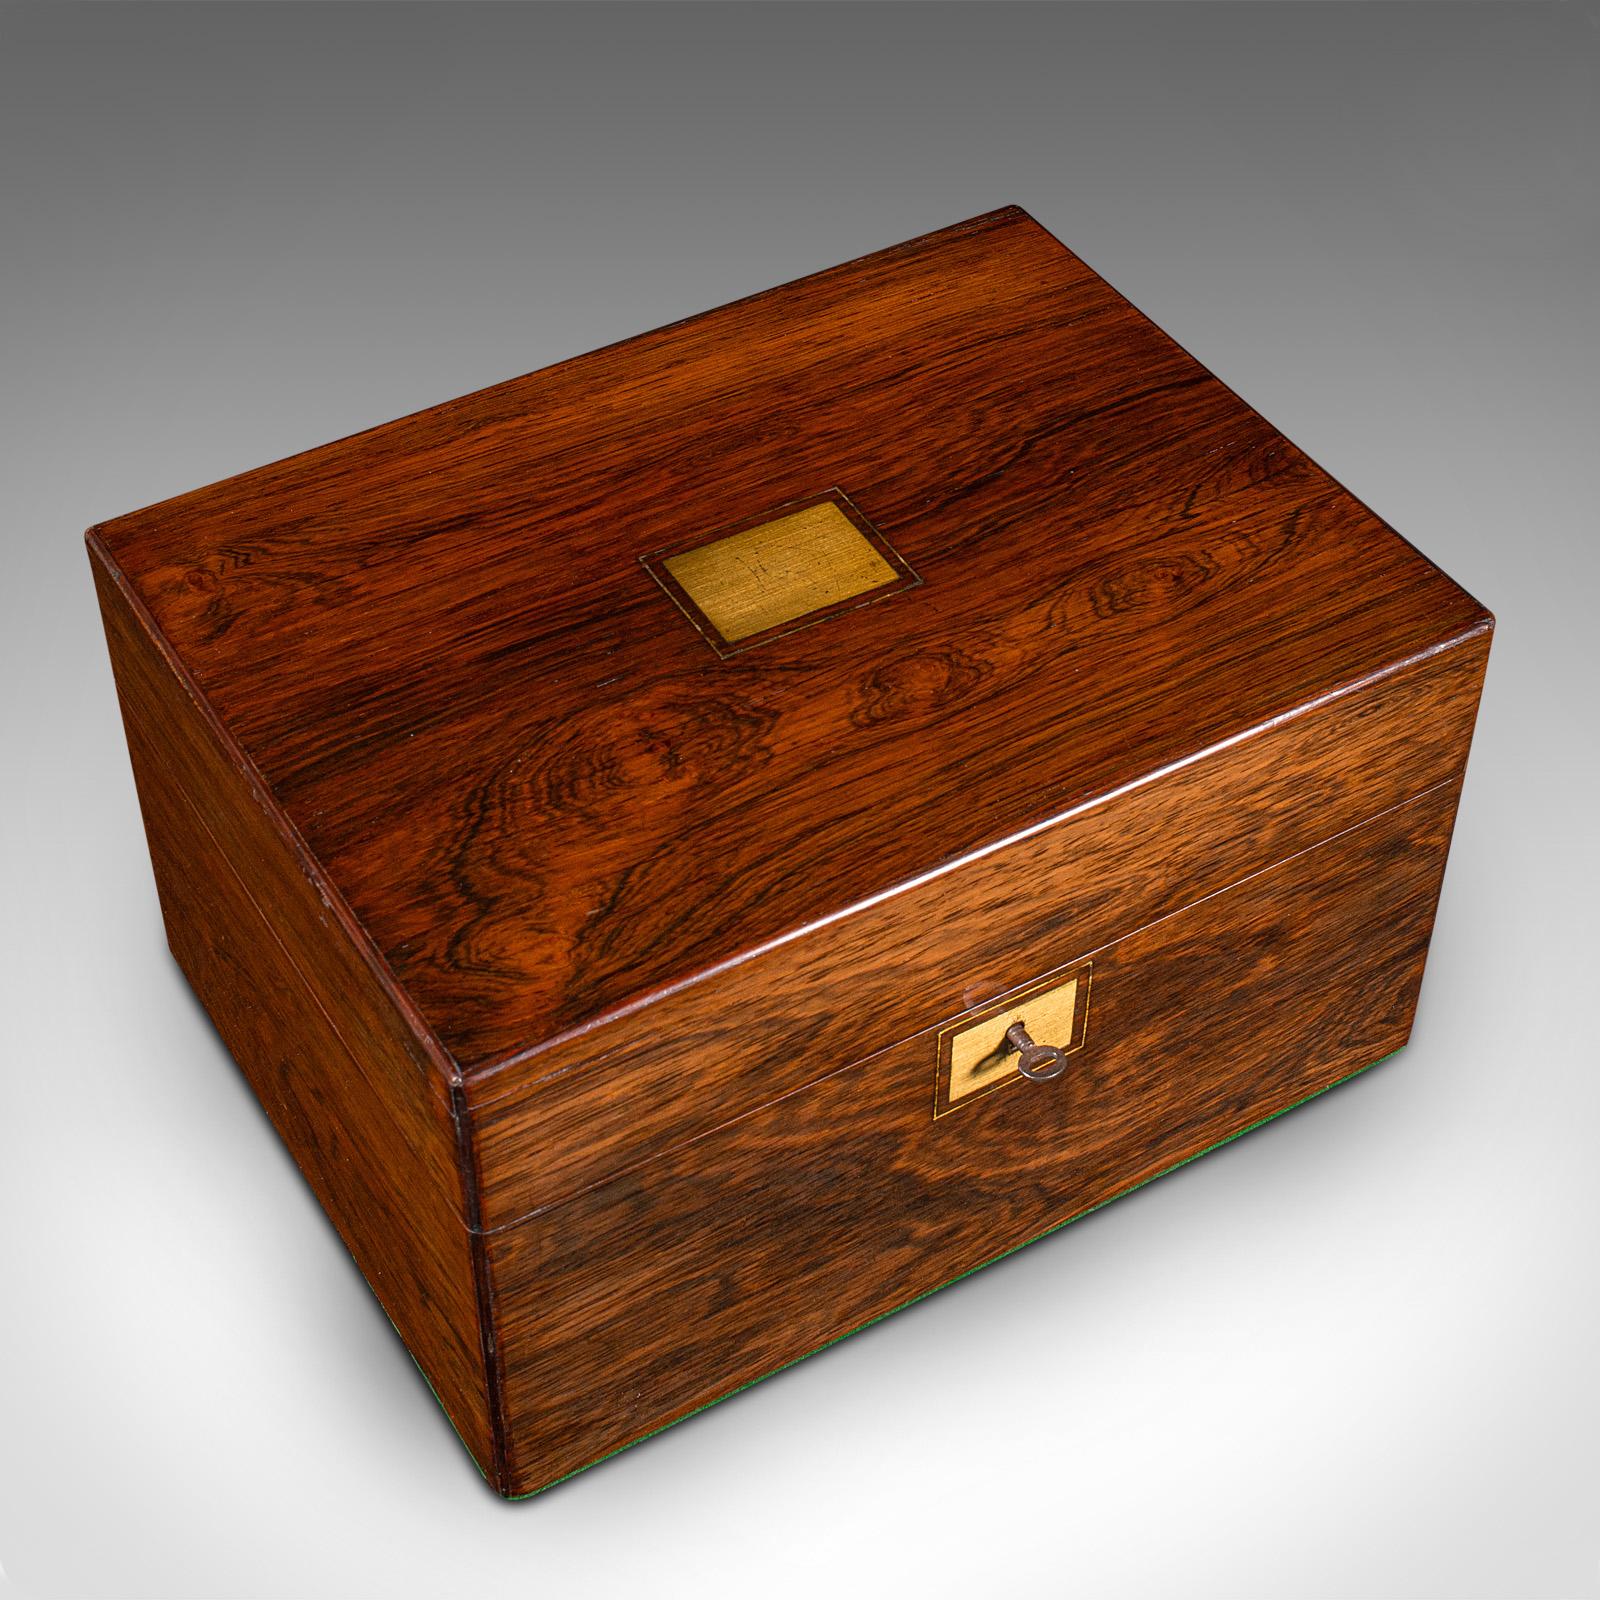 Antique Vanity Case, English, Travelling Dressing Table Box, Regency, Circa 1820 For Sale 2